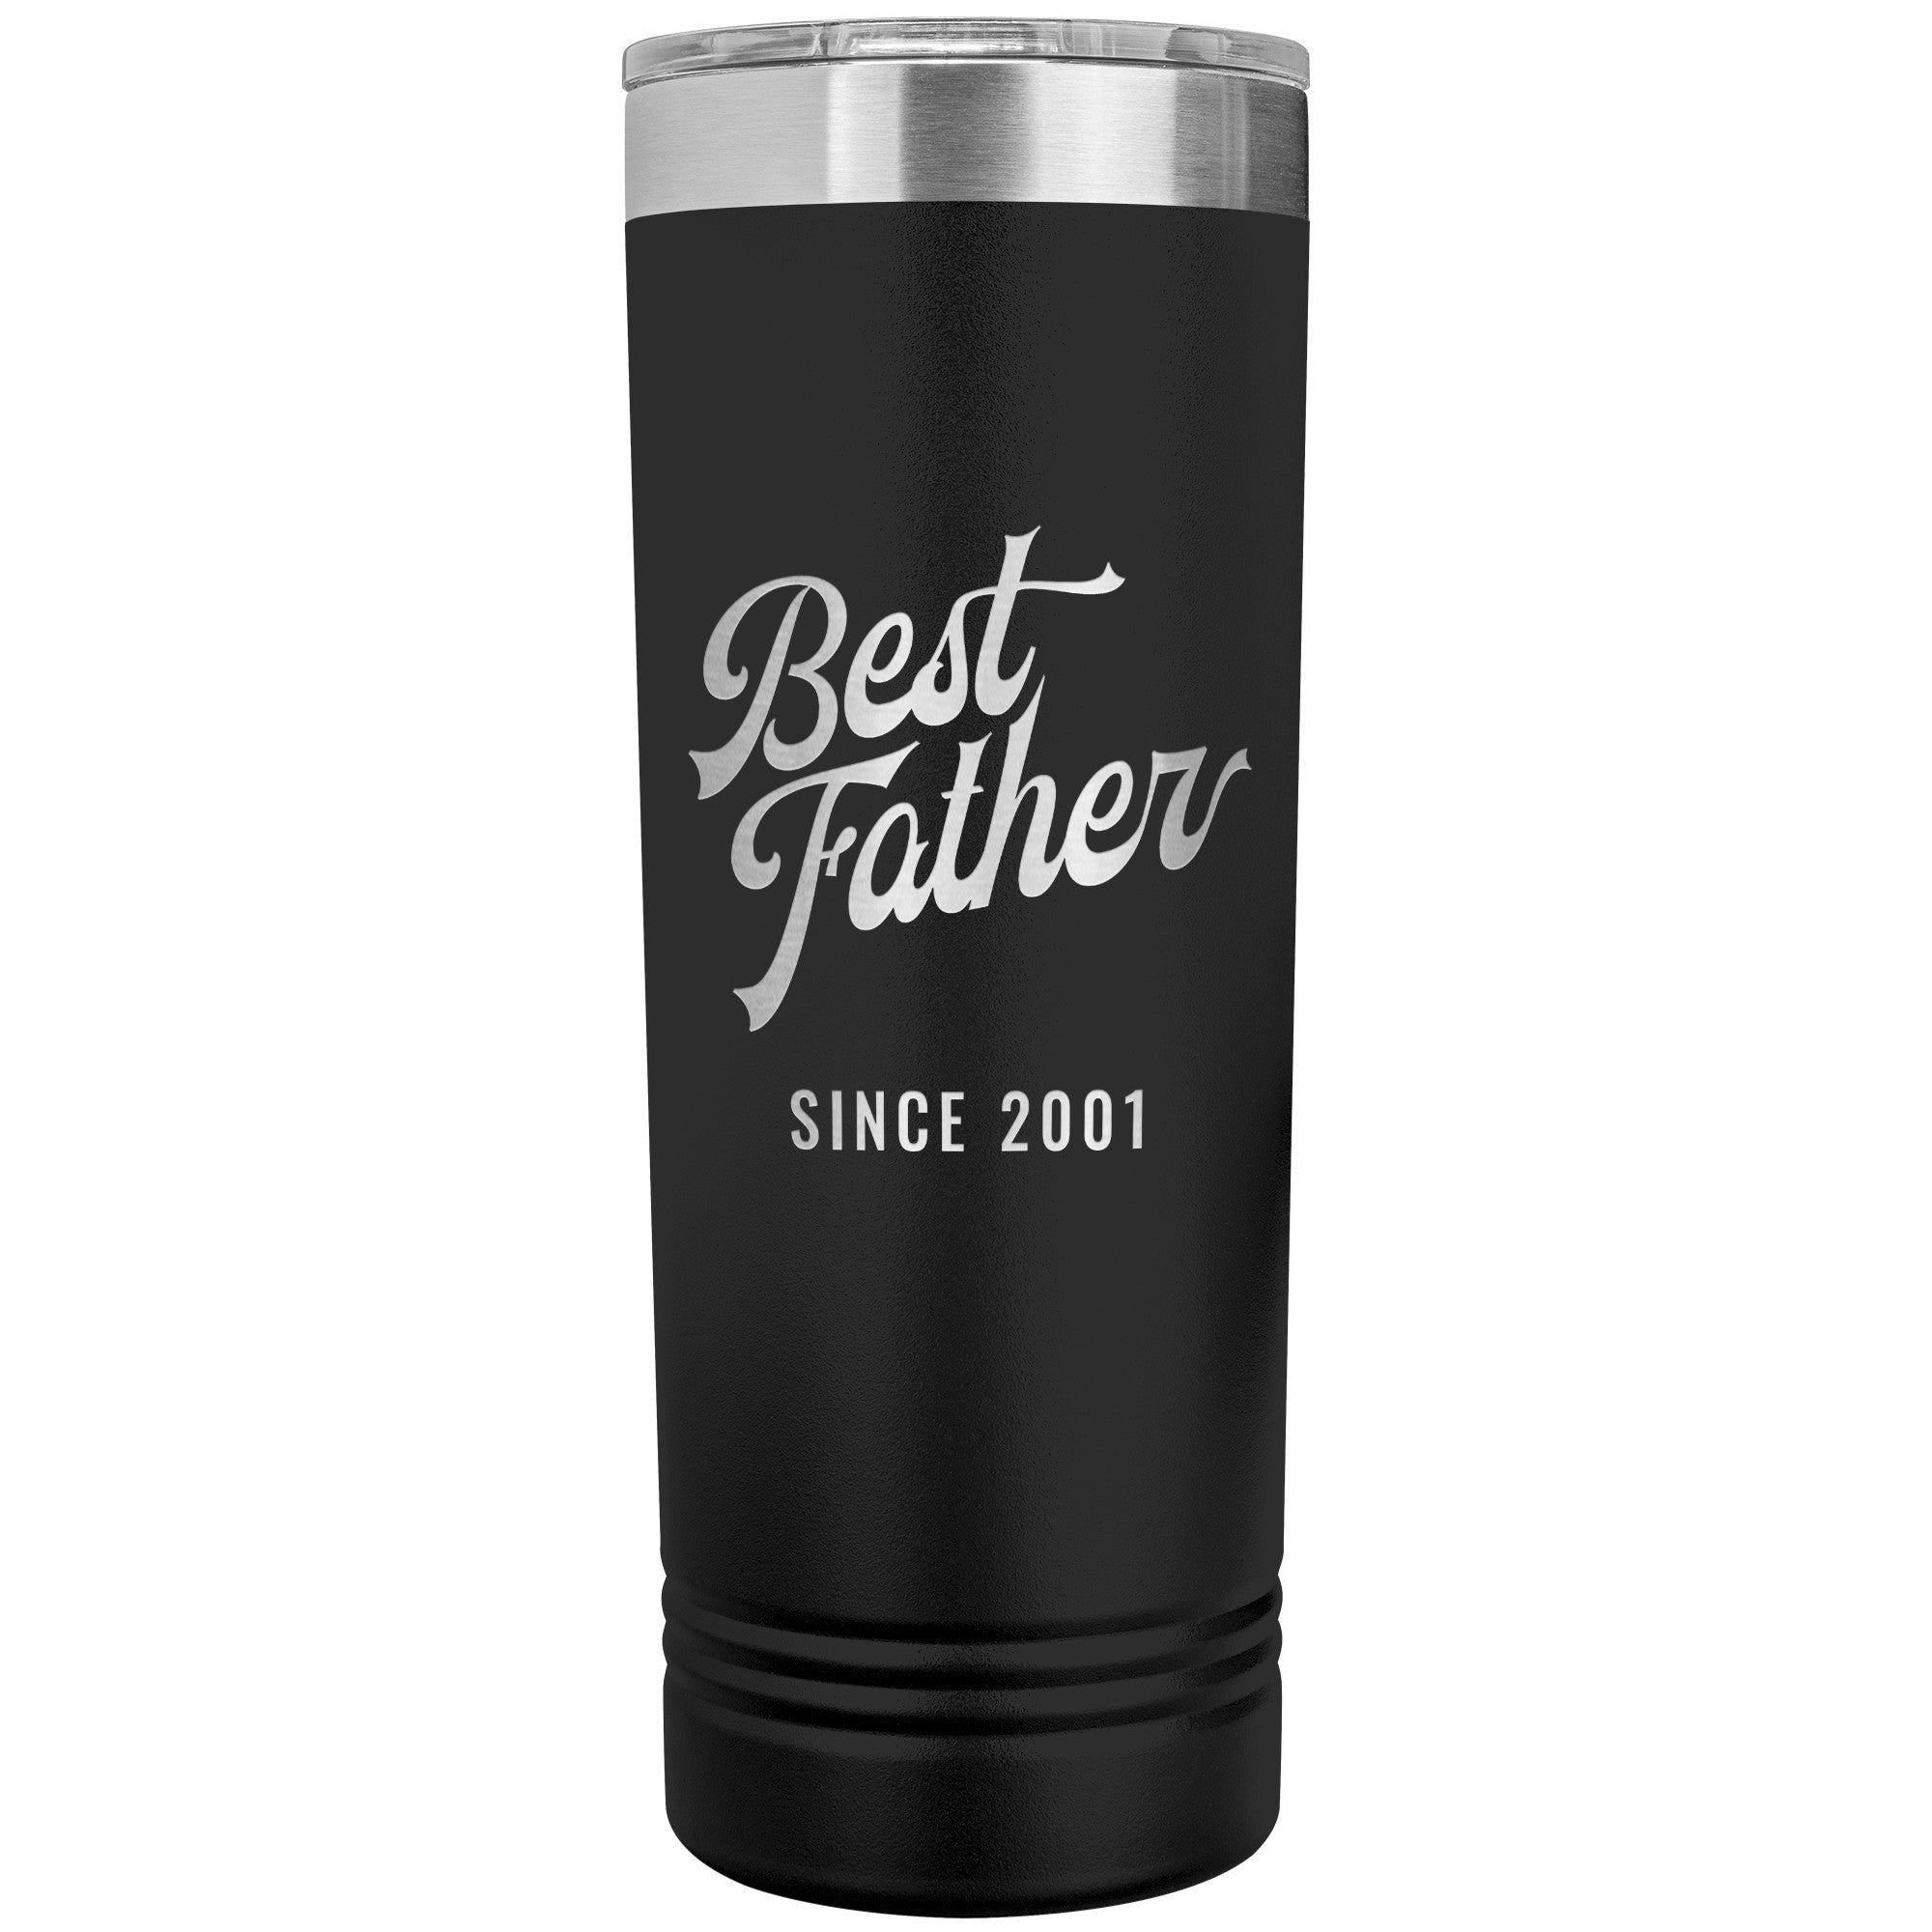 Best Father Since 2001 - 22oz Insulated Skinny Tumbler